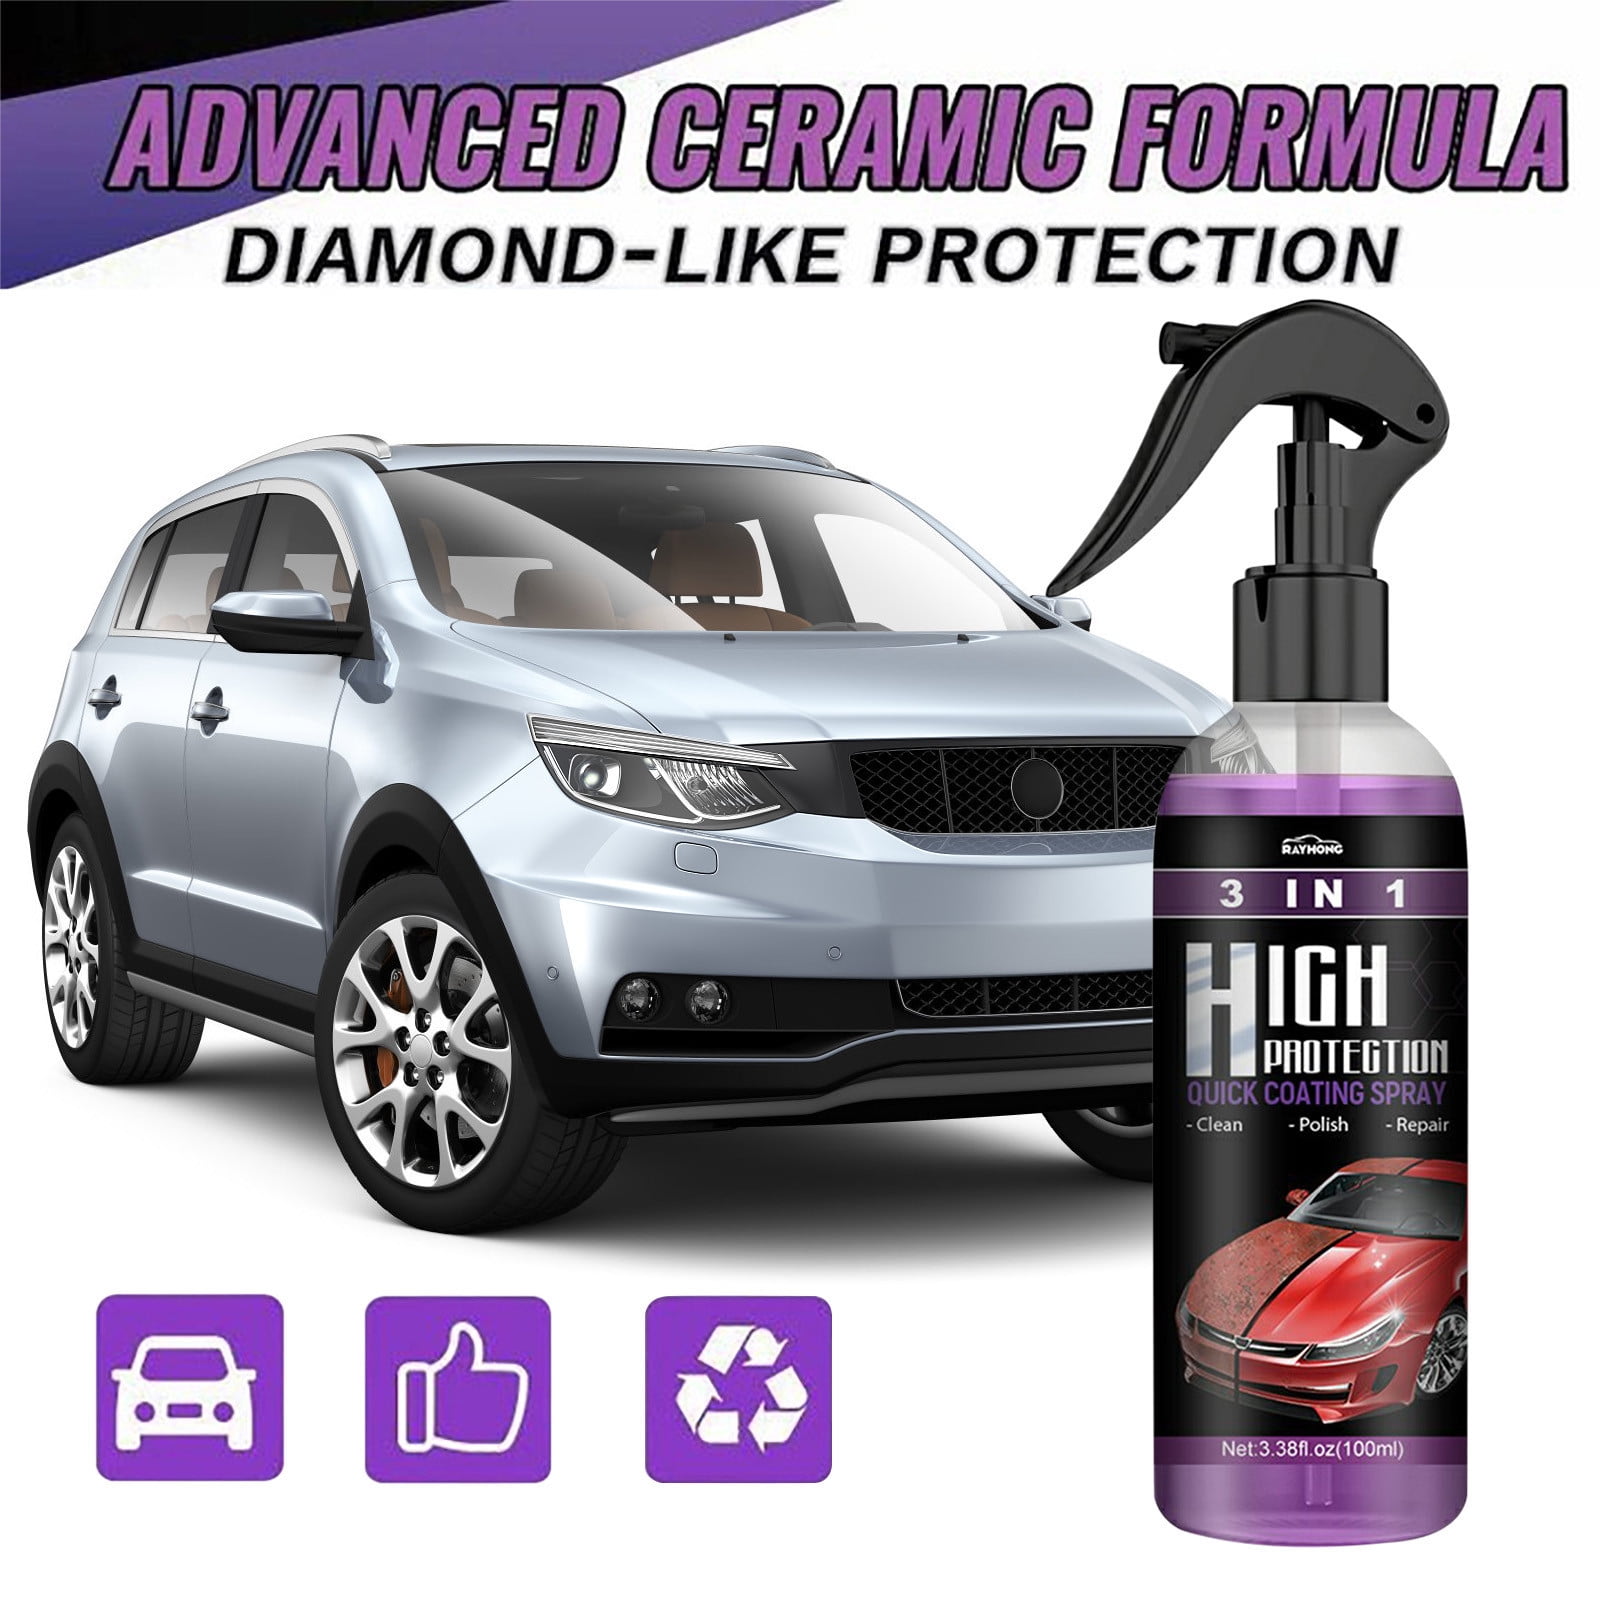  XTryfun Plastic Repairer for Cars Resists Water, UV Rays, Dirt,  Ceramic Coating, Not Dressing, Last Over 200 Washes, Highly Concentrated,  30ml : Automotive